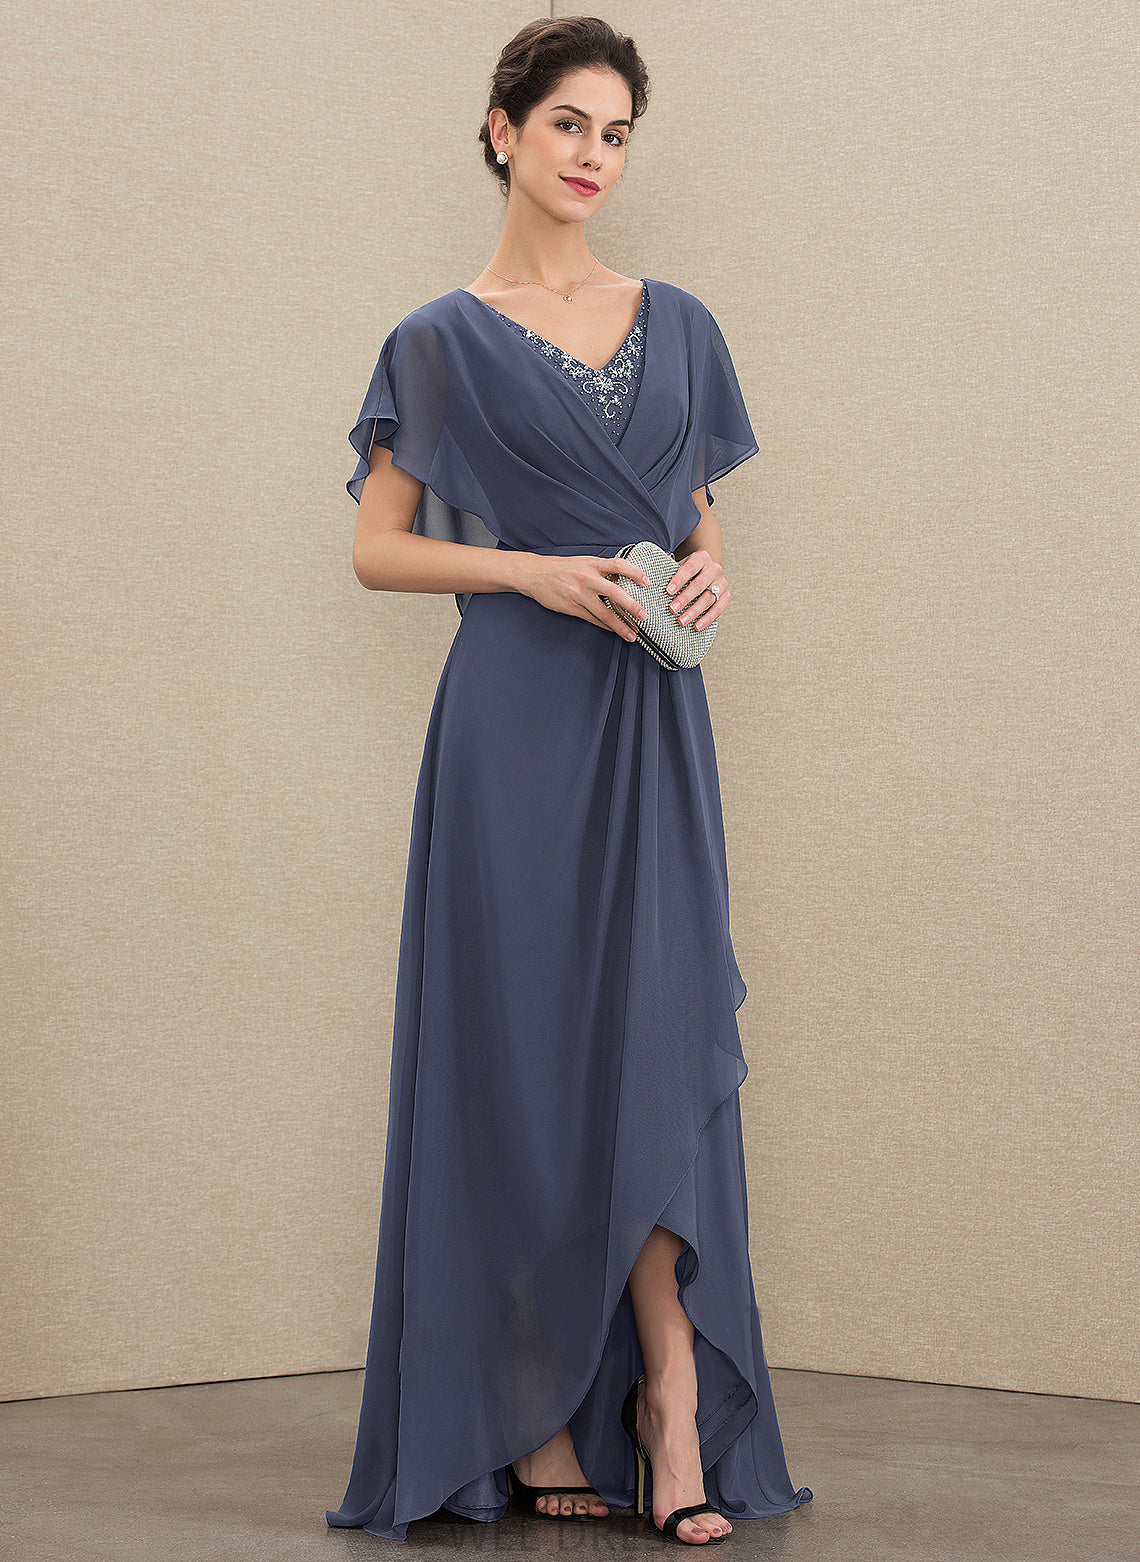 Asymmetrical V-neck Sequins Chiffon A-Line Beading Mother of the Bride Dresses Lacey the Bride Mother Dress of With